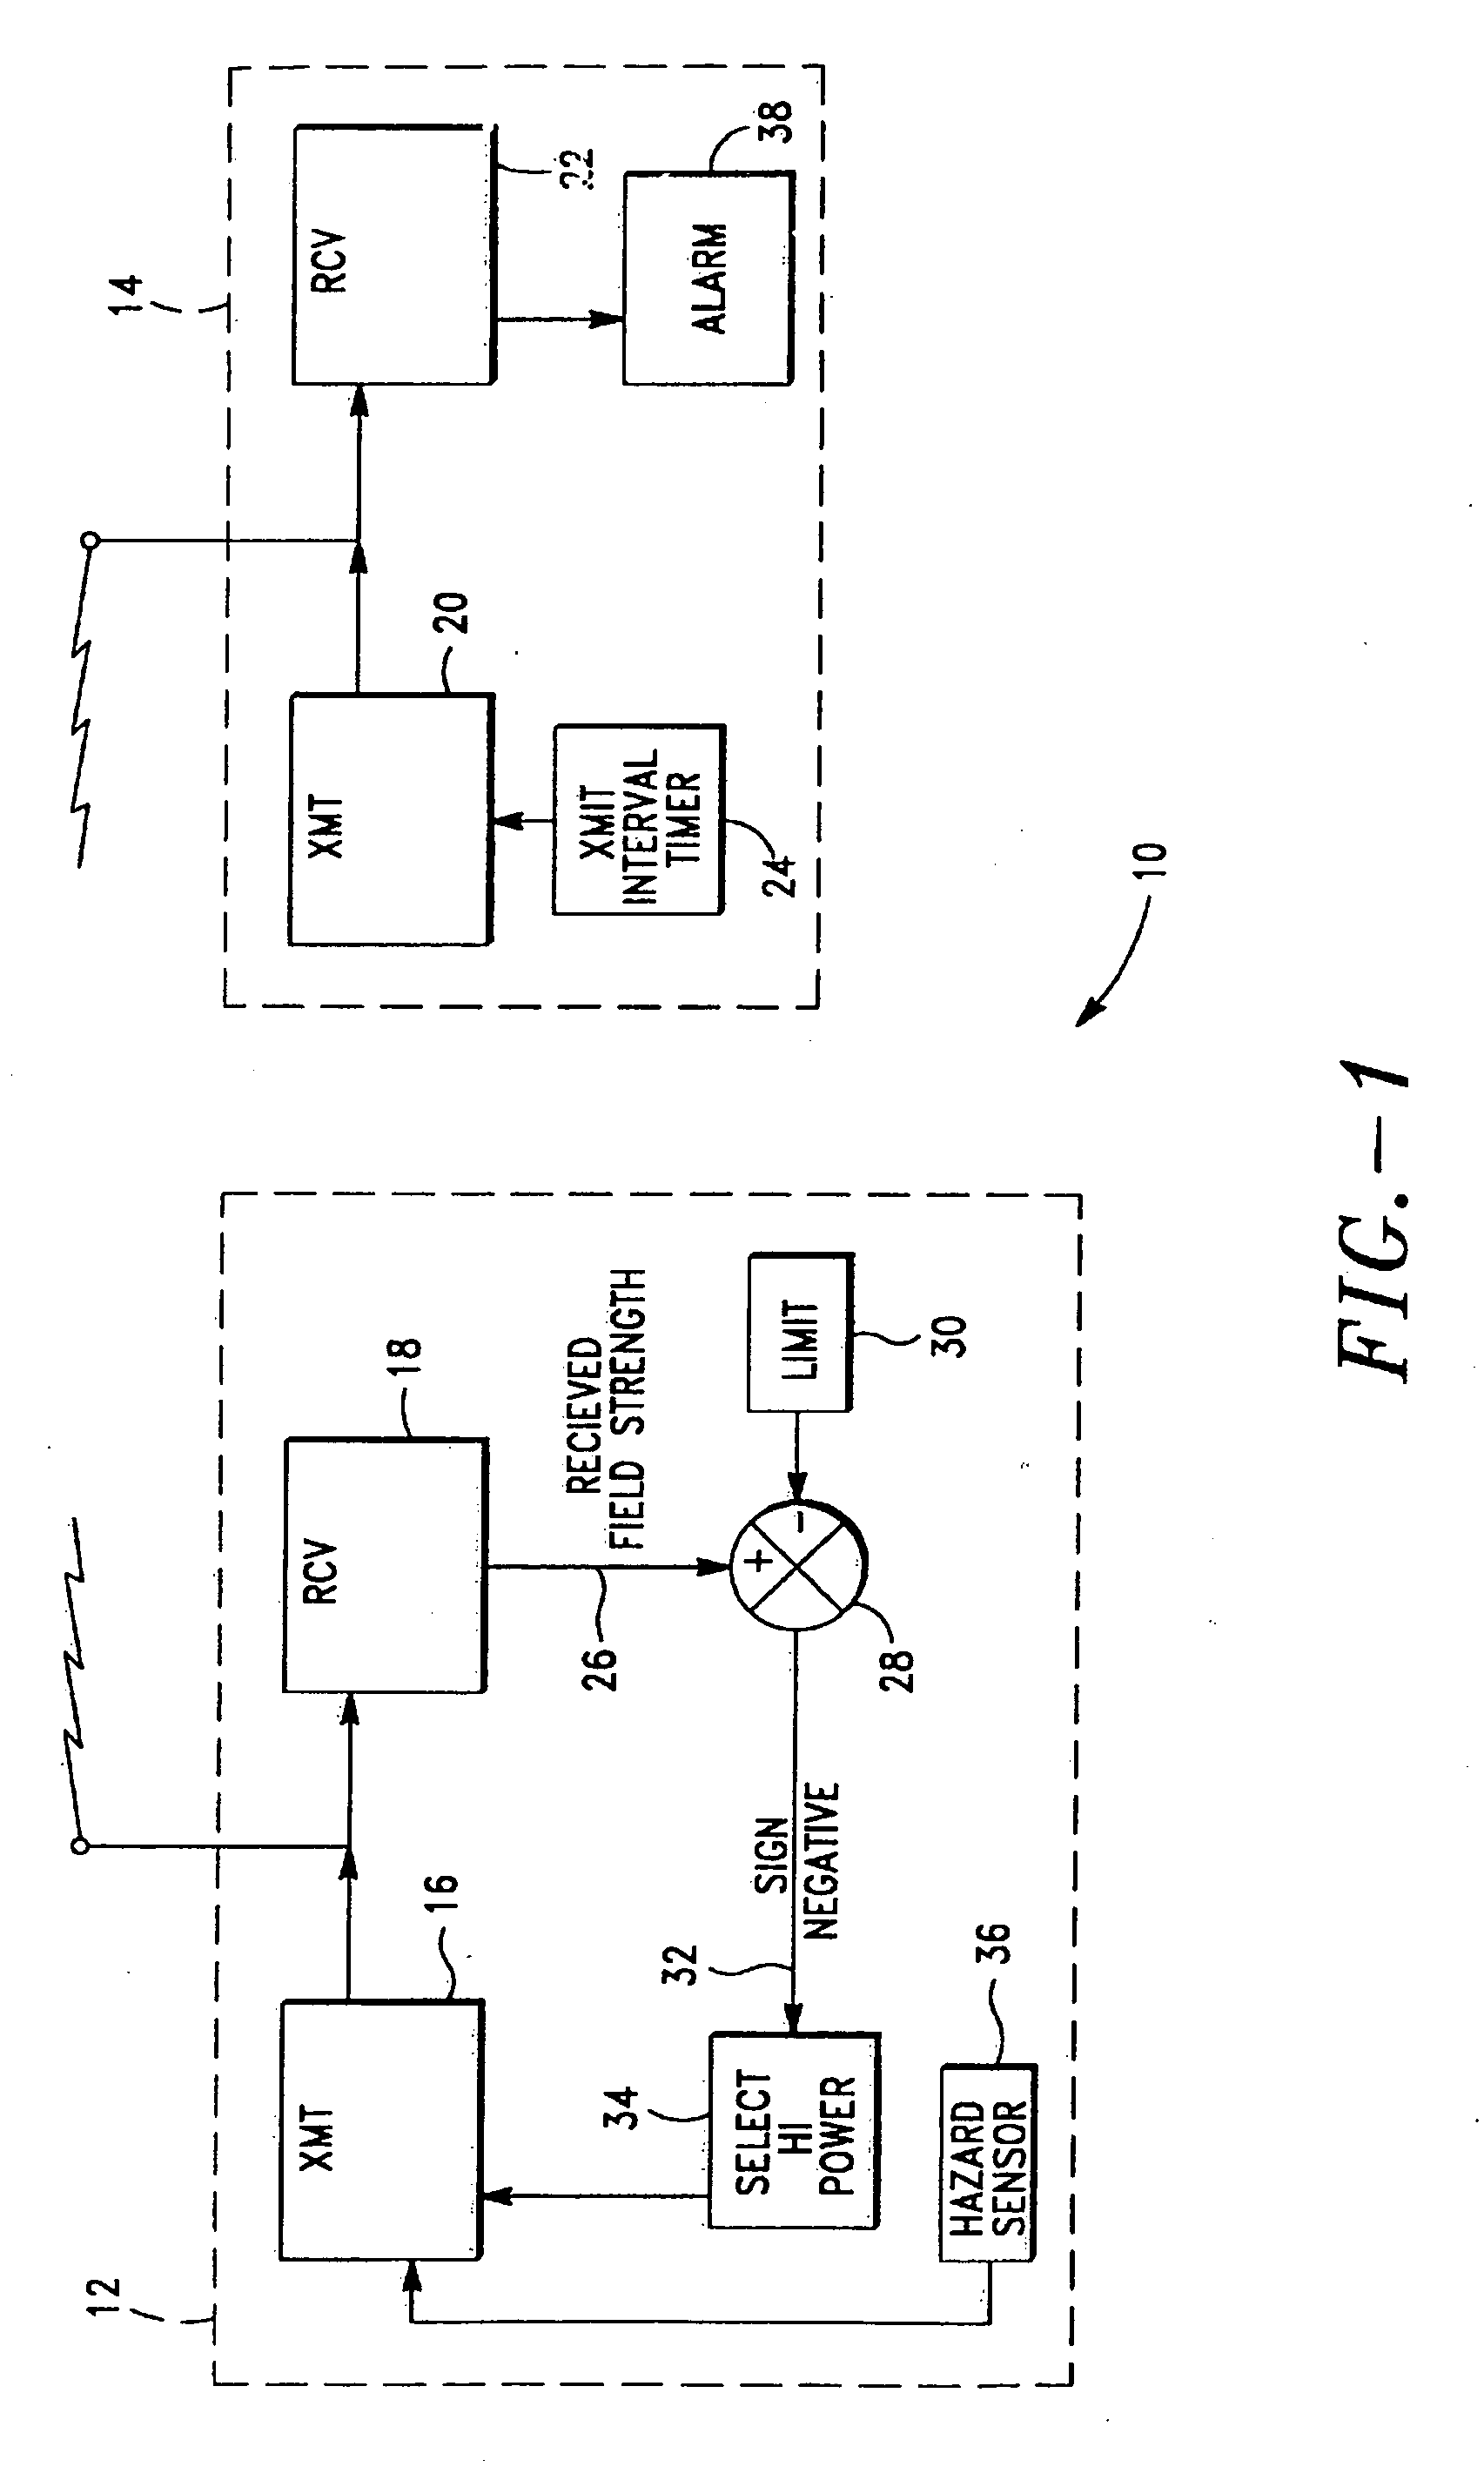 Multi-hazard alarm system using selectable power-level transmission and localization